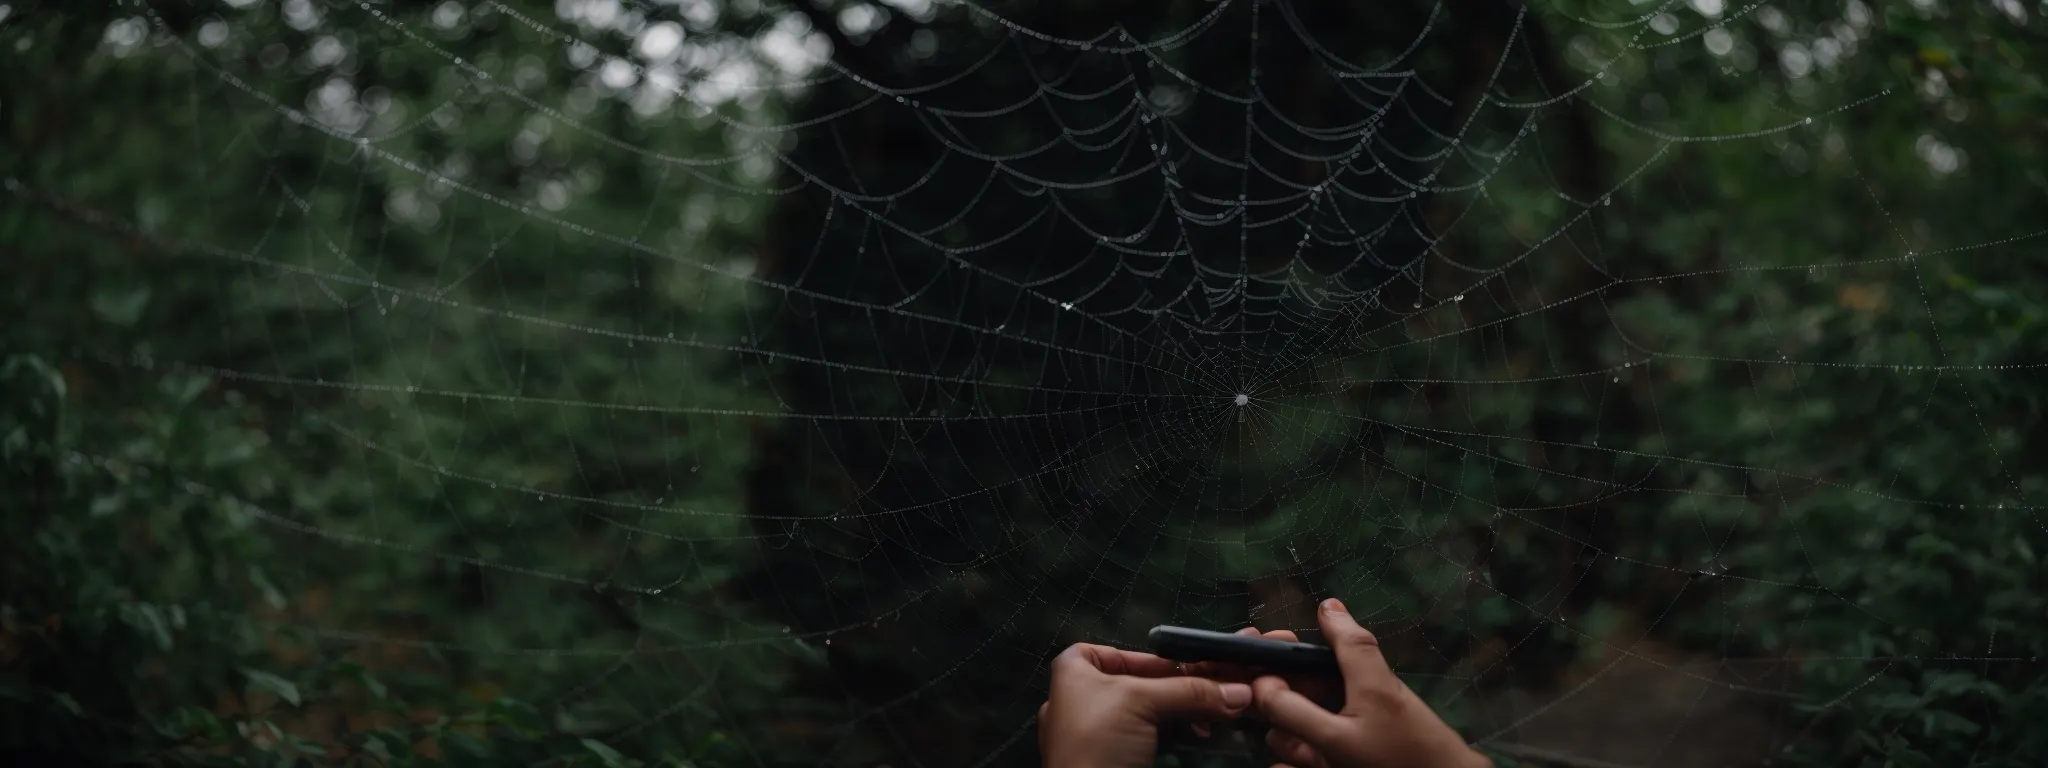 a person studying an intricate spider web, symbolizing the complex interconnectivity of seo strategies.